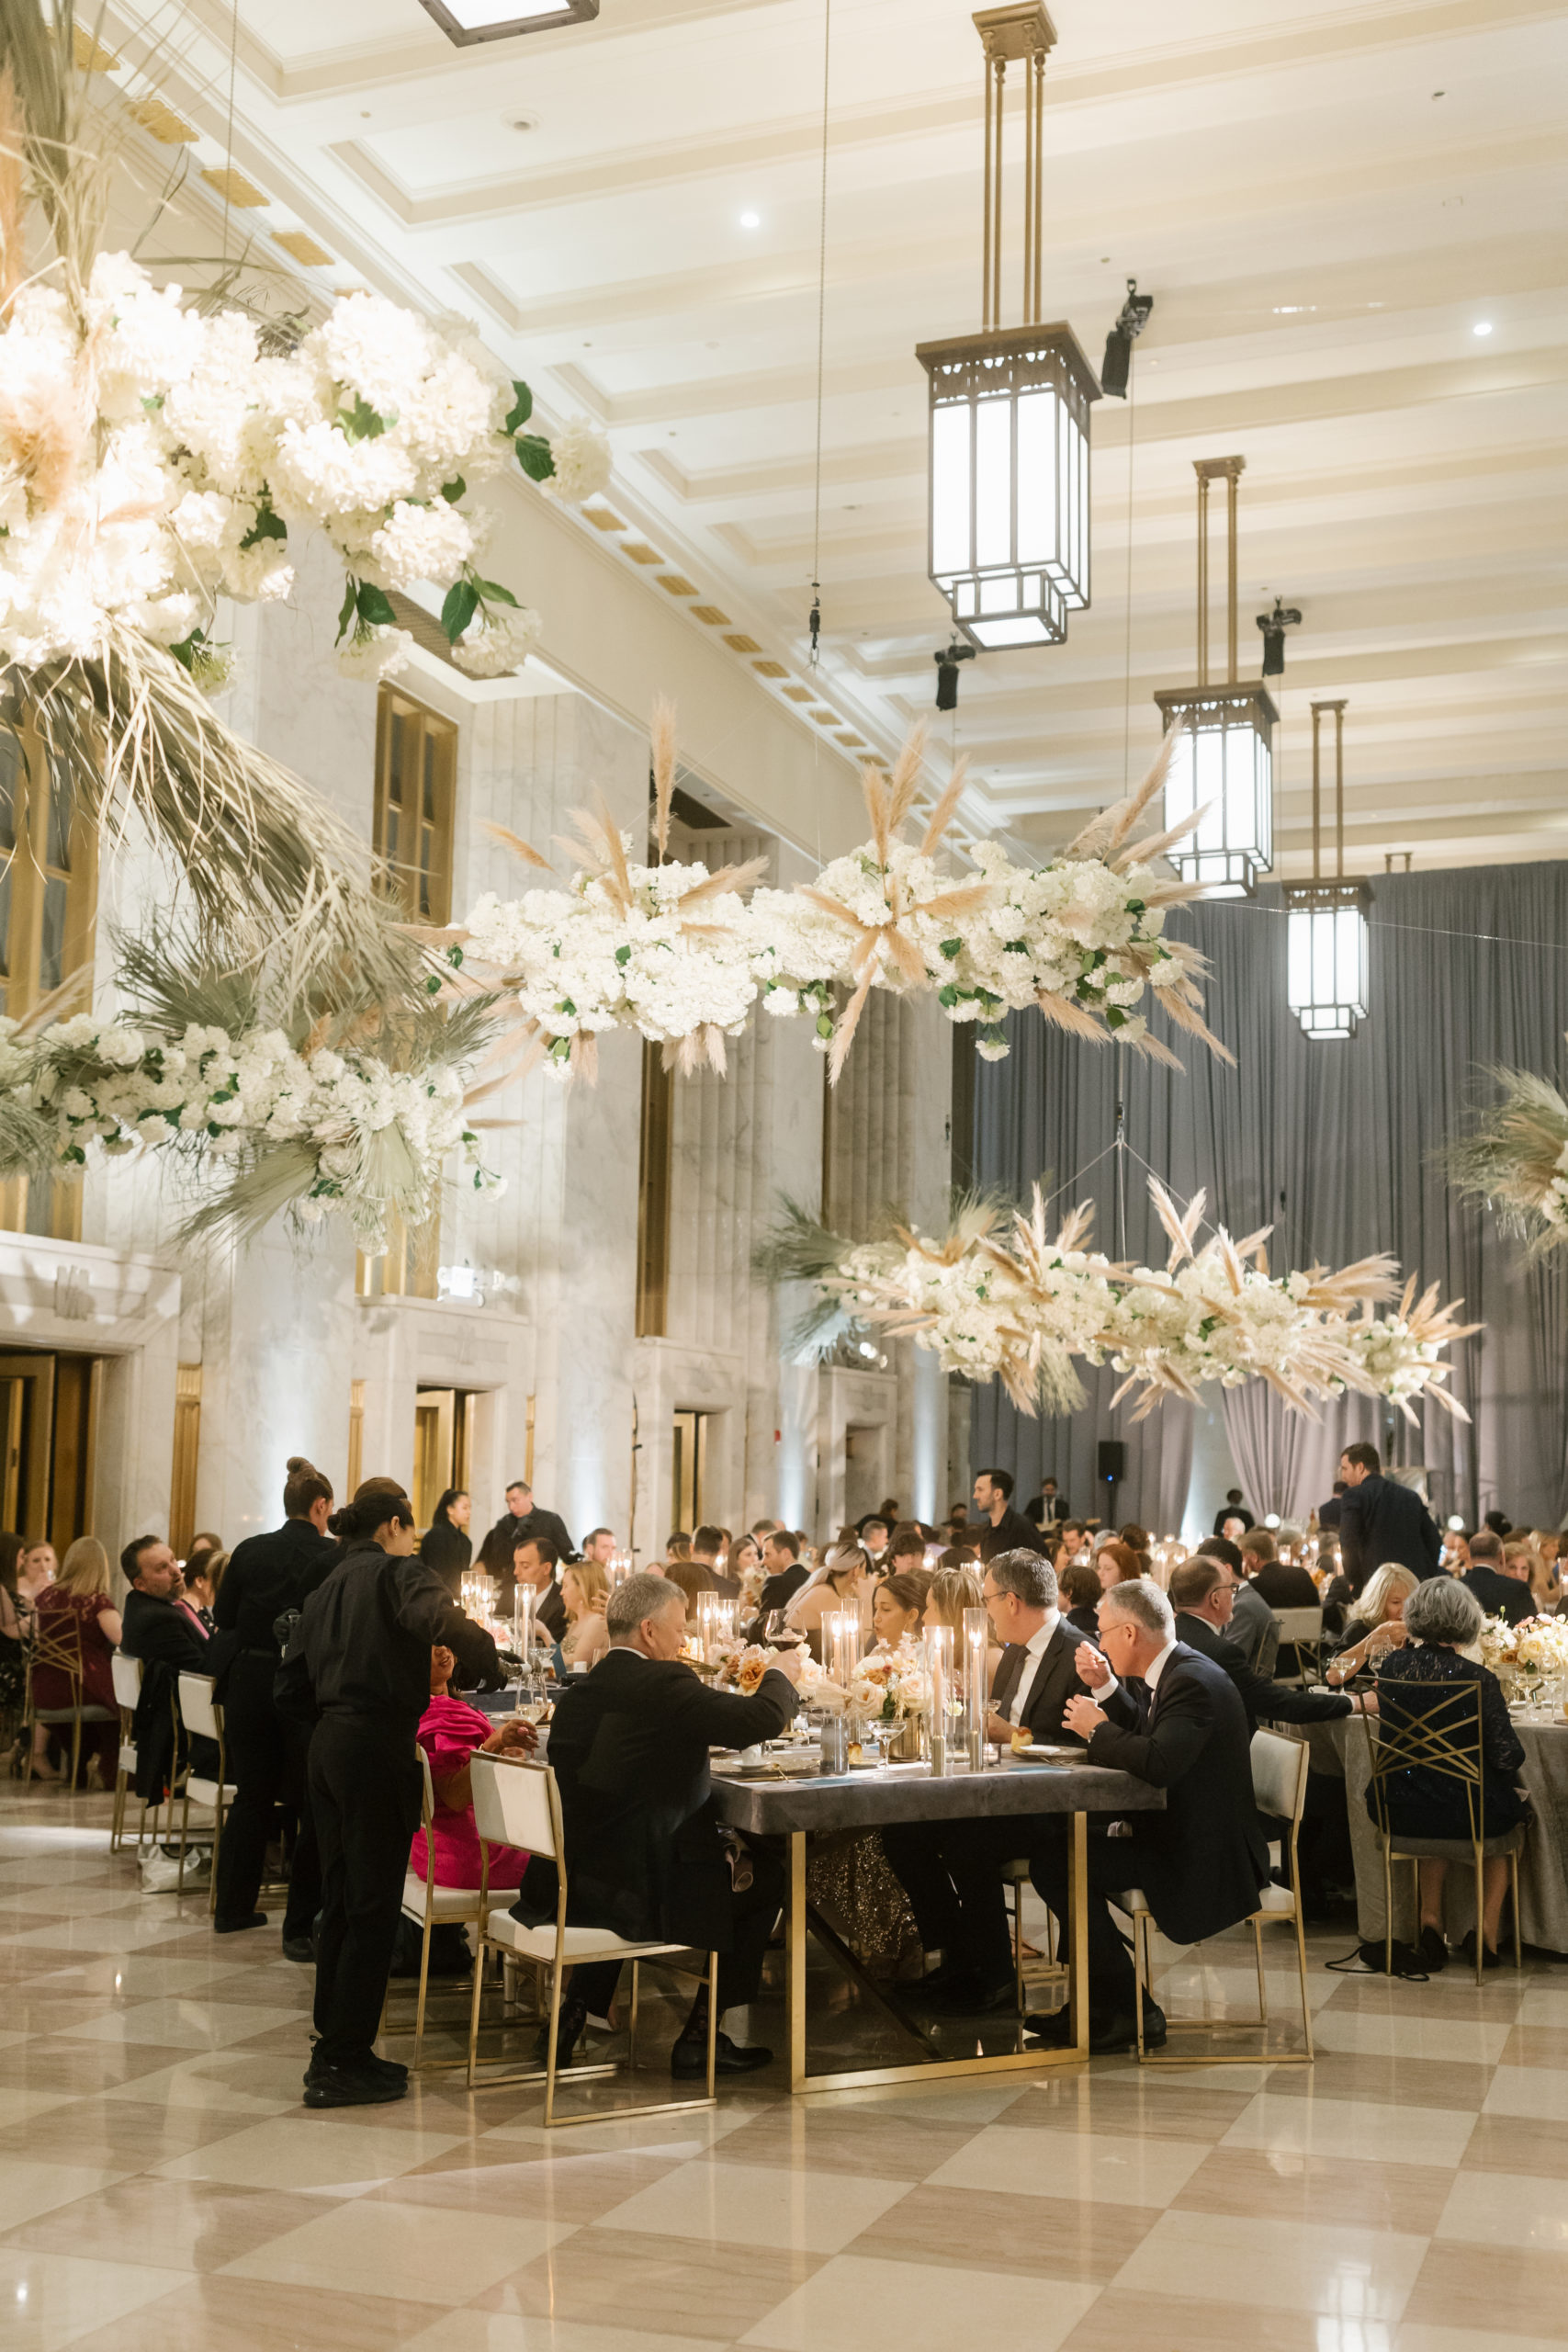 Black Tie Wedding at The Old Post Office with hanging floral installations
